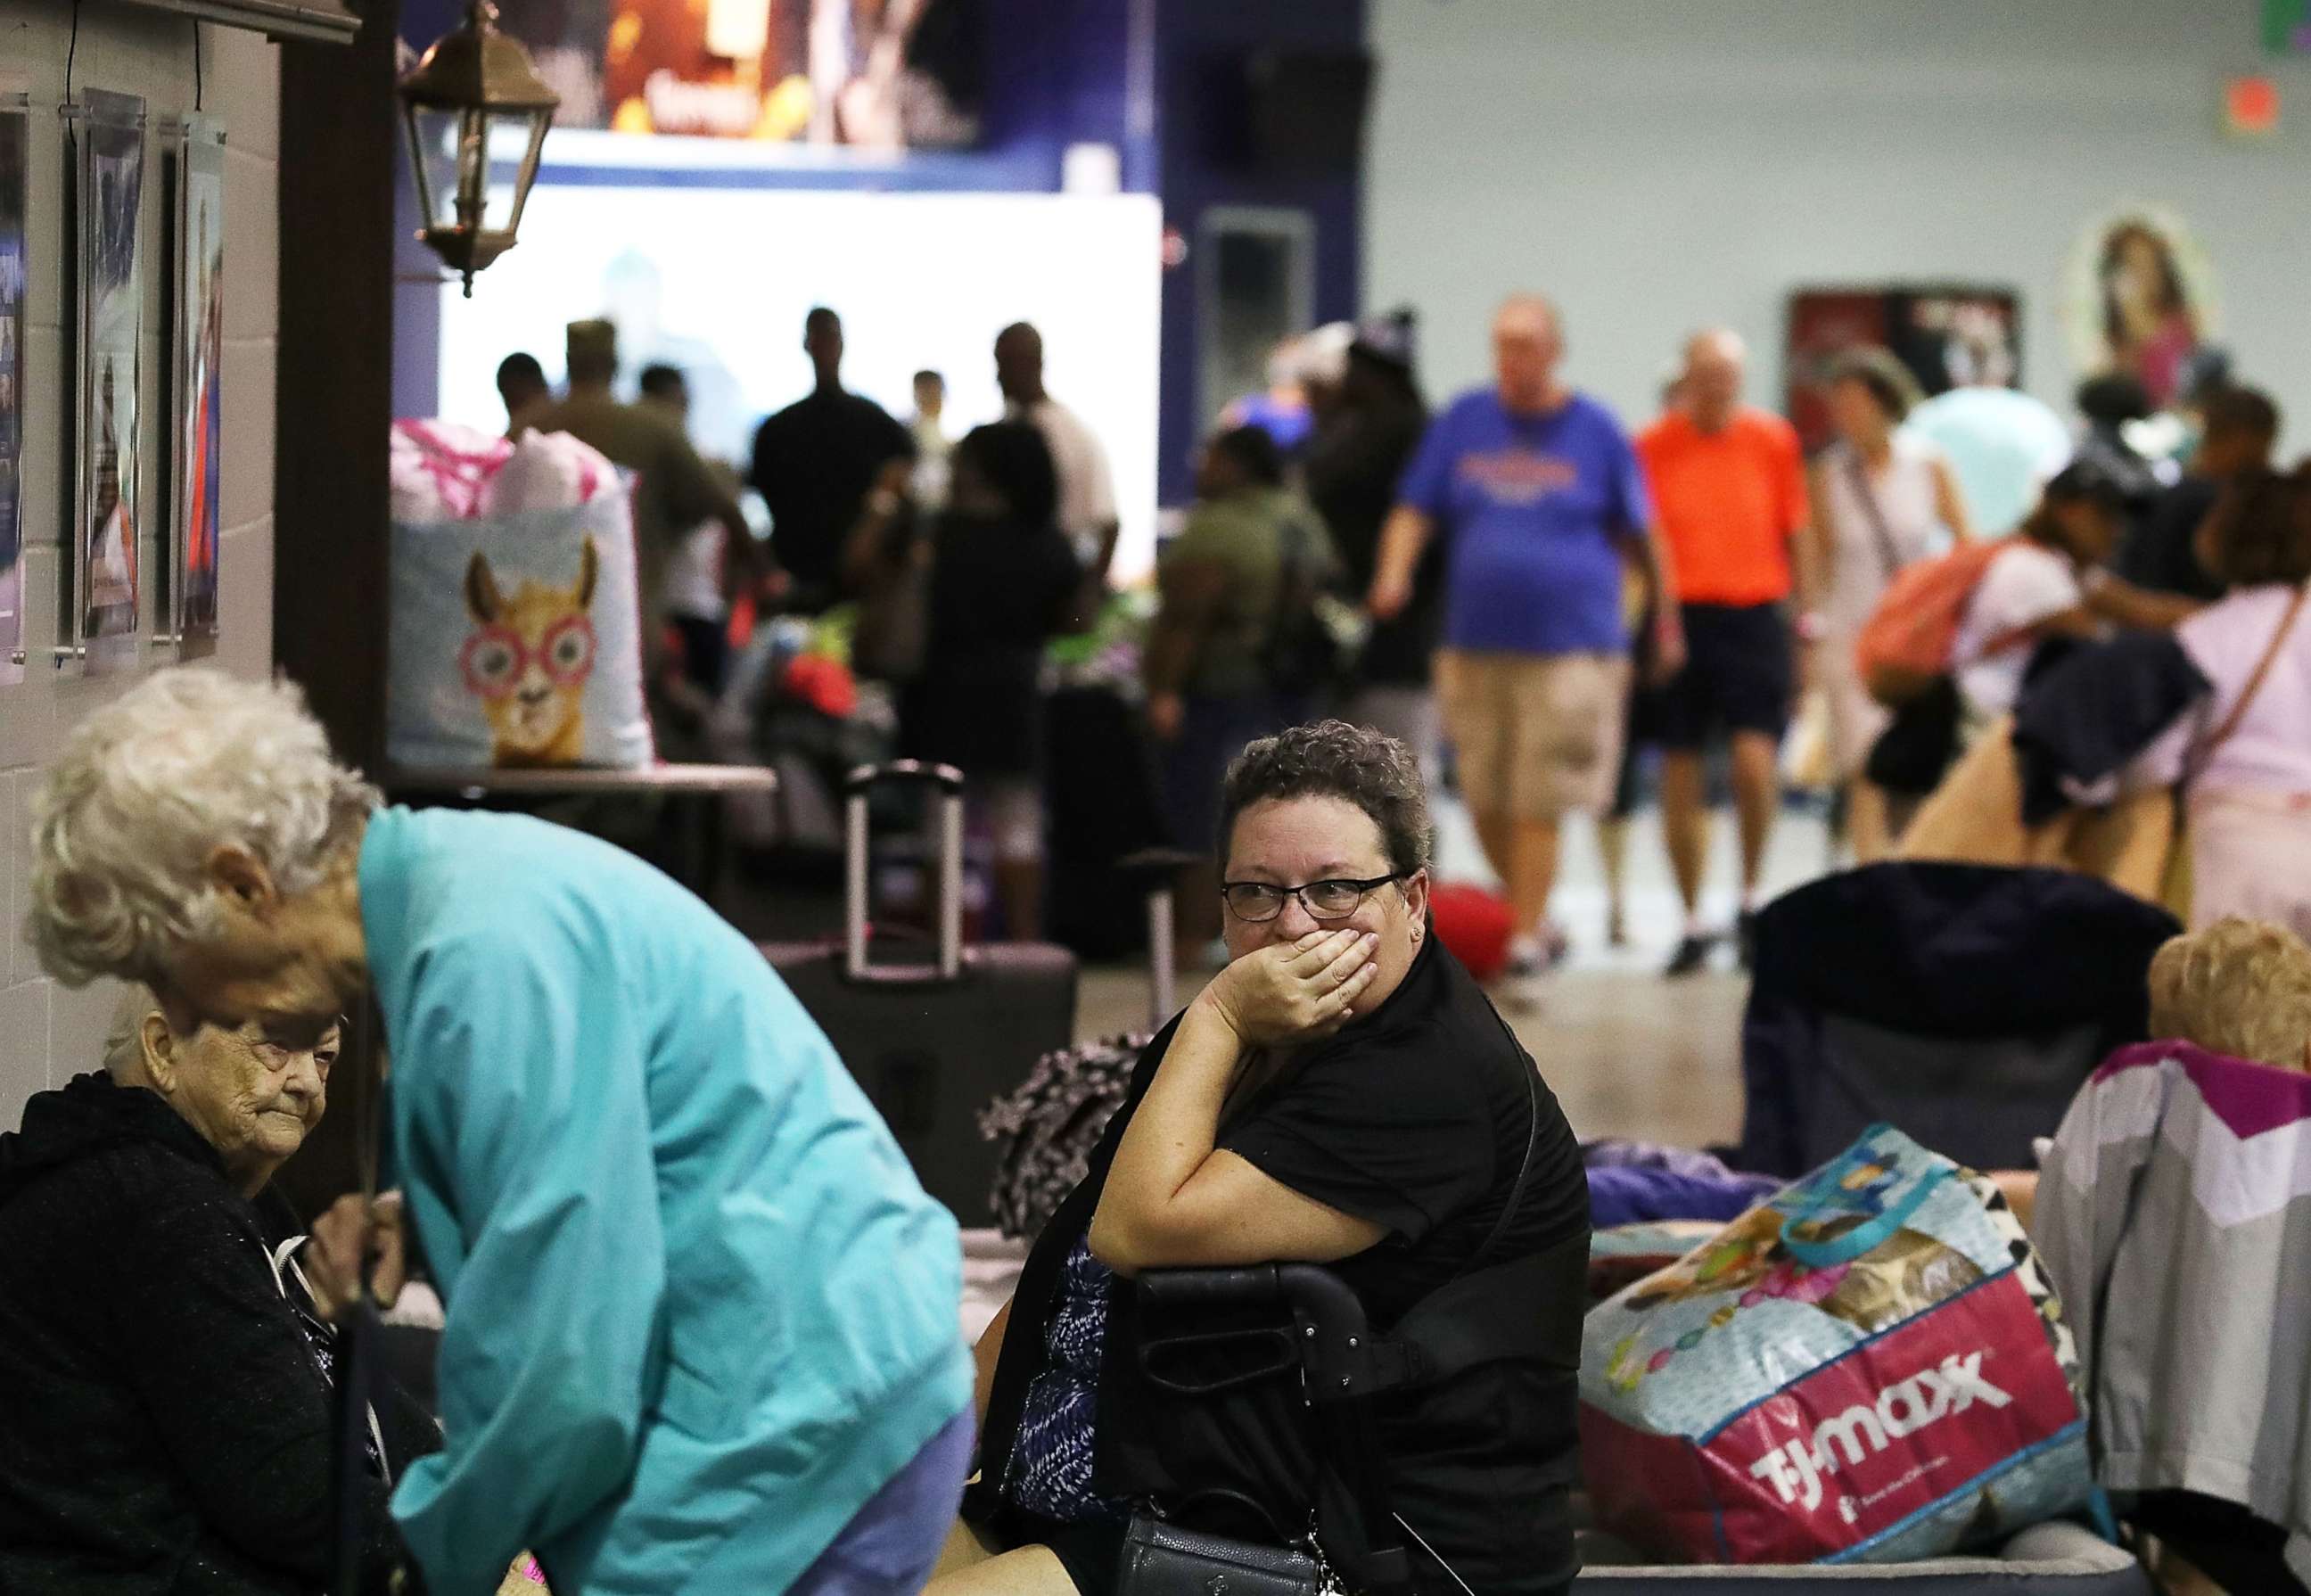 PHOTO: Evacuees sit inside of the Germain Arena that is serving as a shelter from the approaching Hurricane Irma, Sept. 9, 2017 in Estero, Florida. 